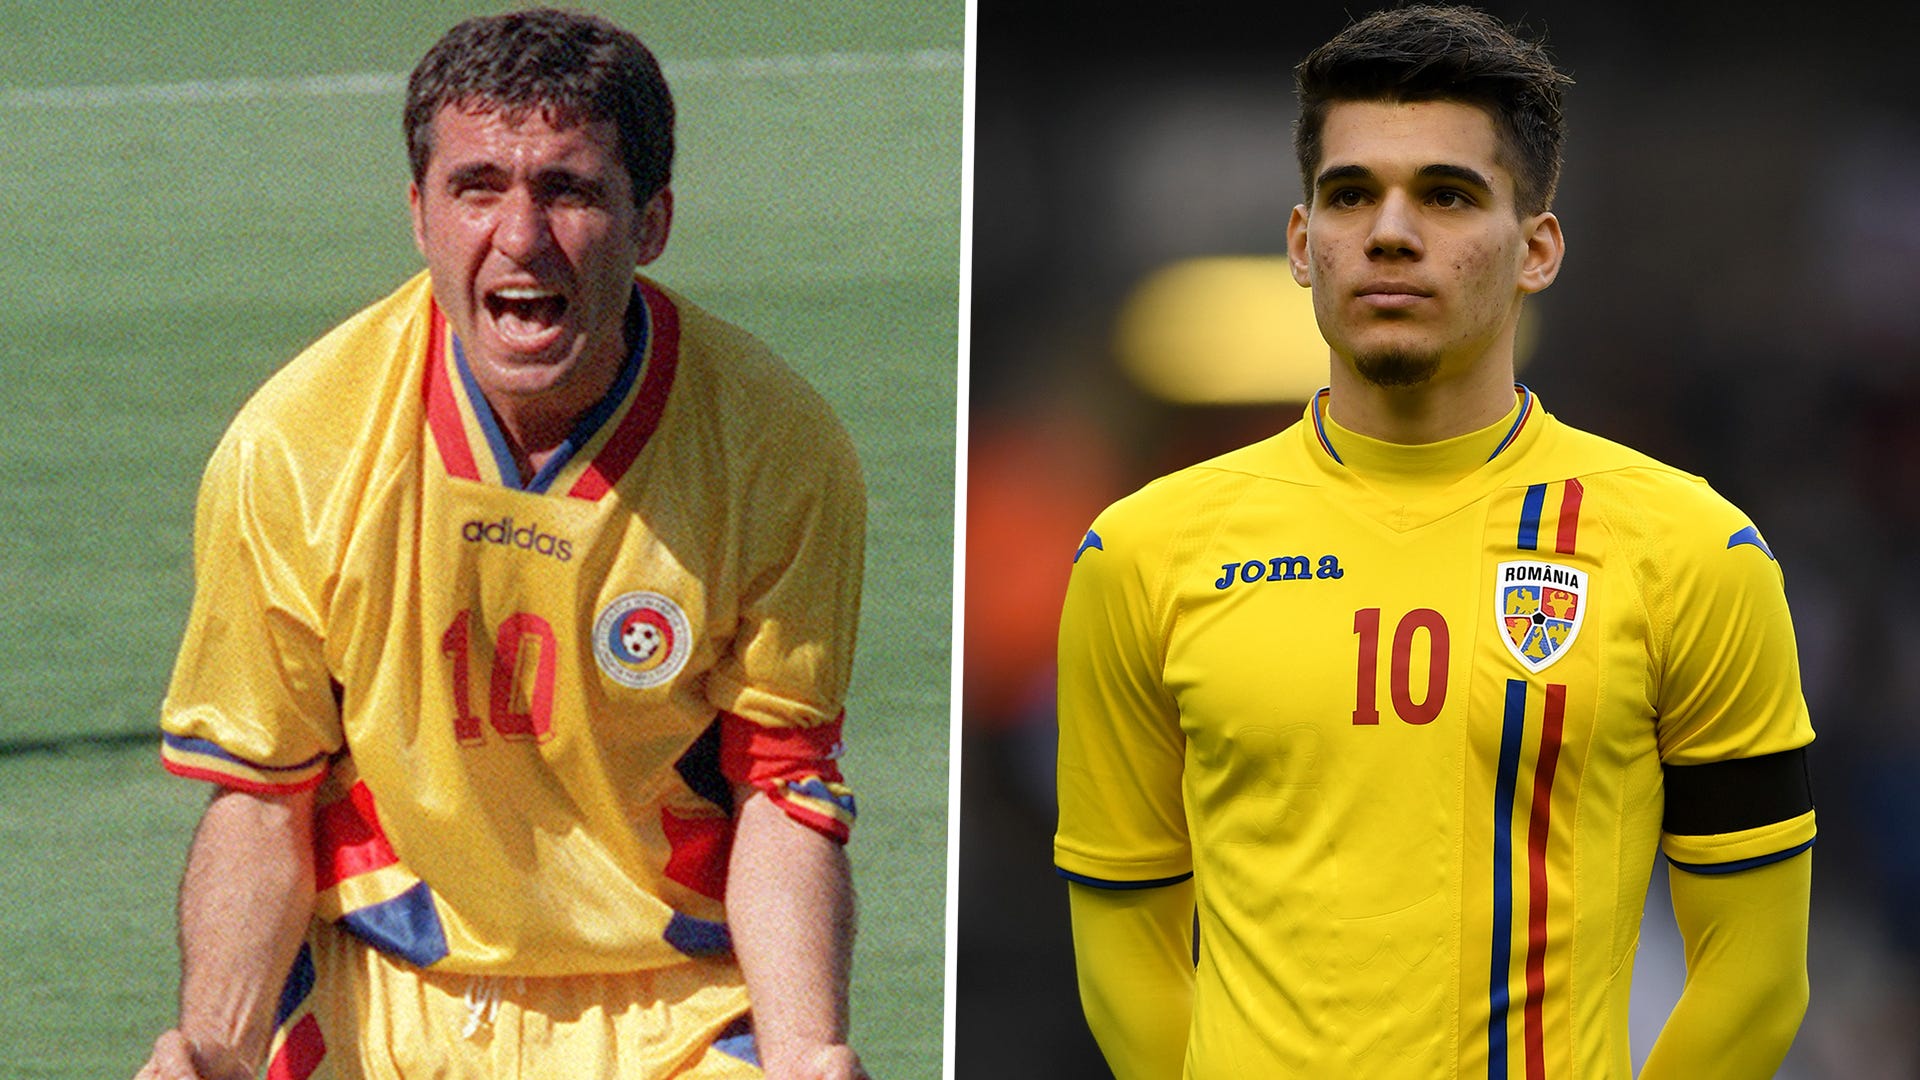 Think of Romania and you think of Gheorghe Hagi